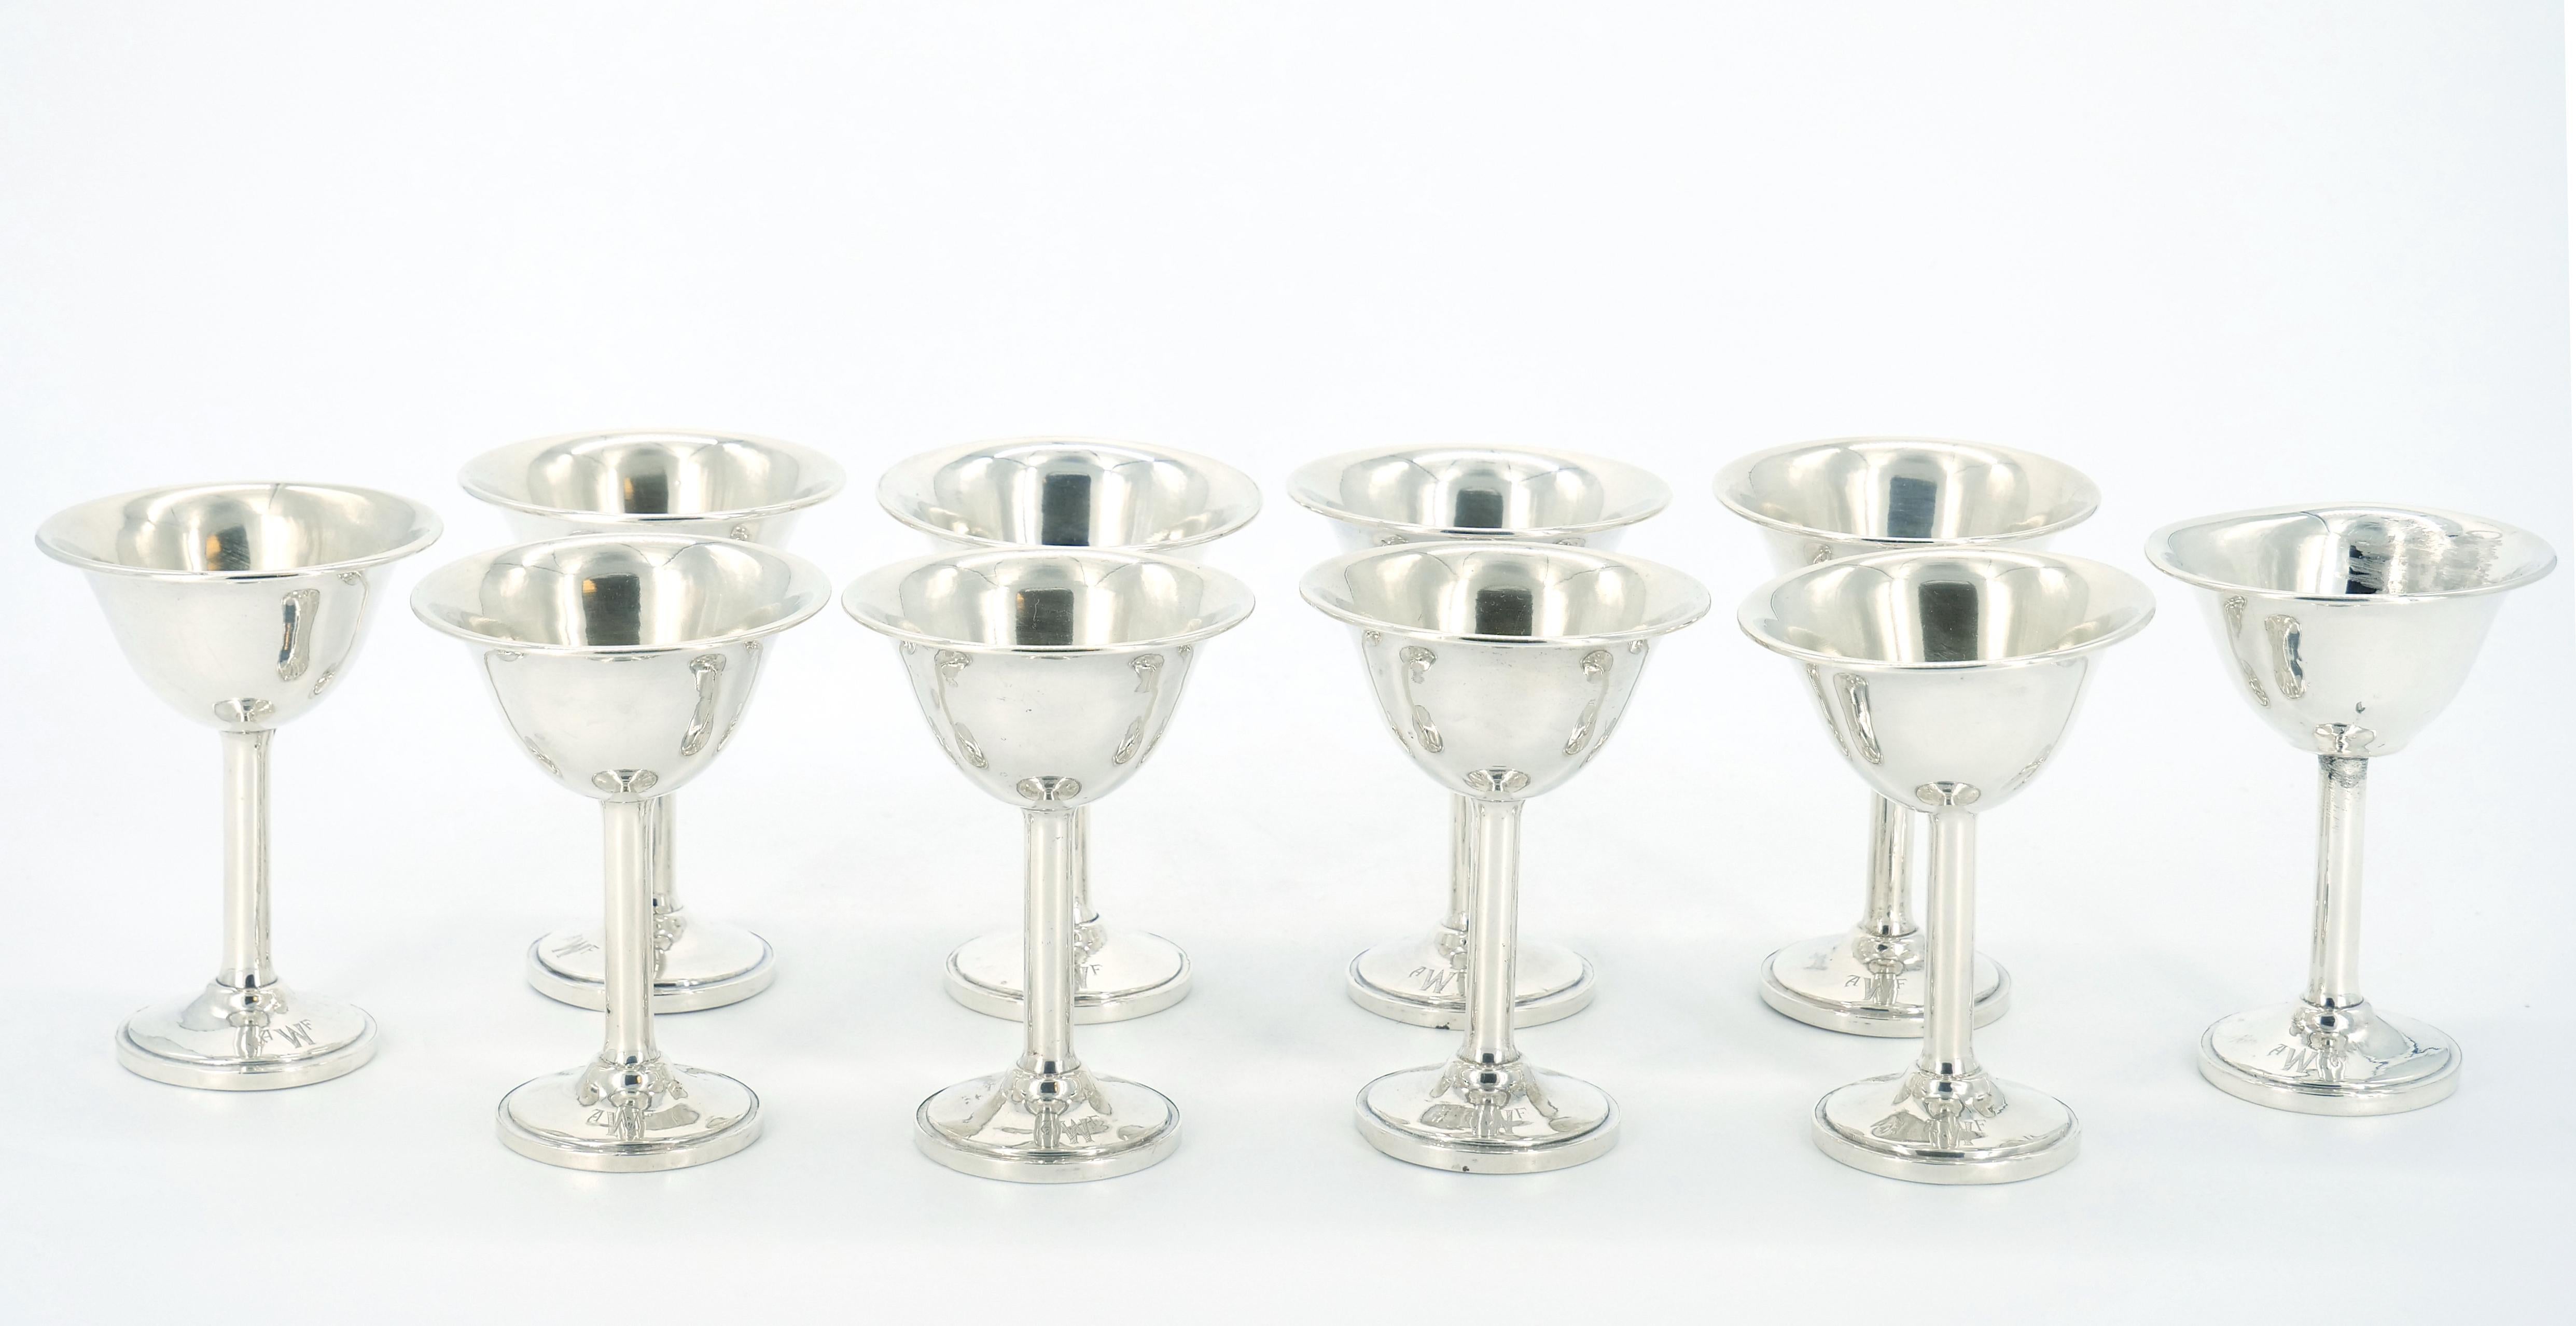 Early 20th Century American Sterling Silver Tableware Cordial's Service / Ten In Good Condition For Sale In Tarry Town, NY